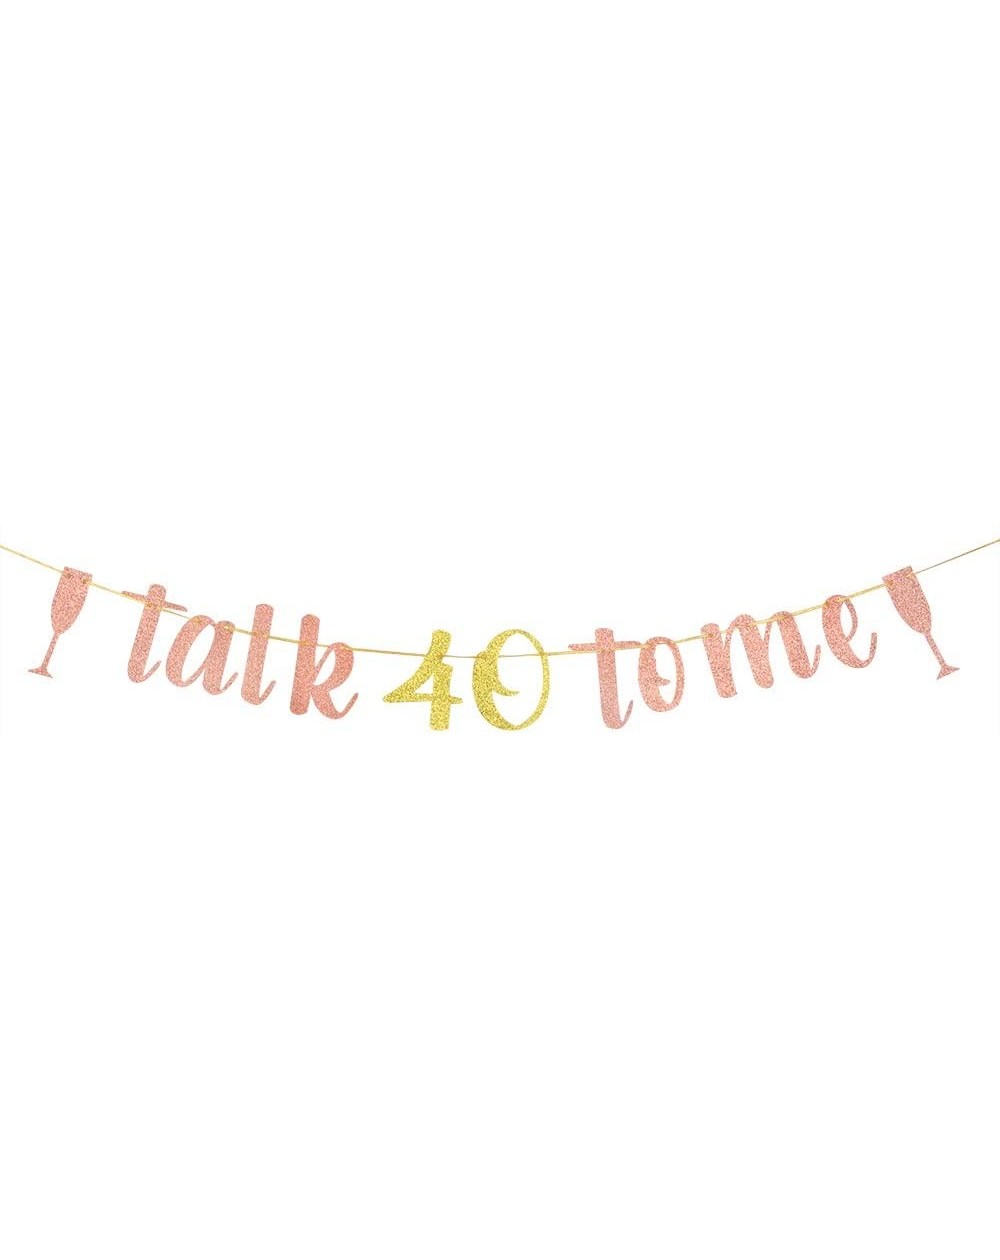 Banners Rose Gold Talk 40 To Me Banner- 40th Birthday Banner- 40th Birthday Party Decoratons - C619CKYRQT9 $7.33